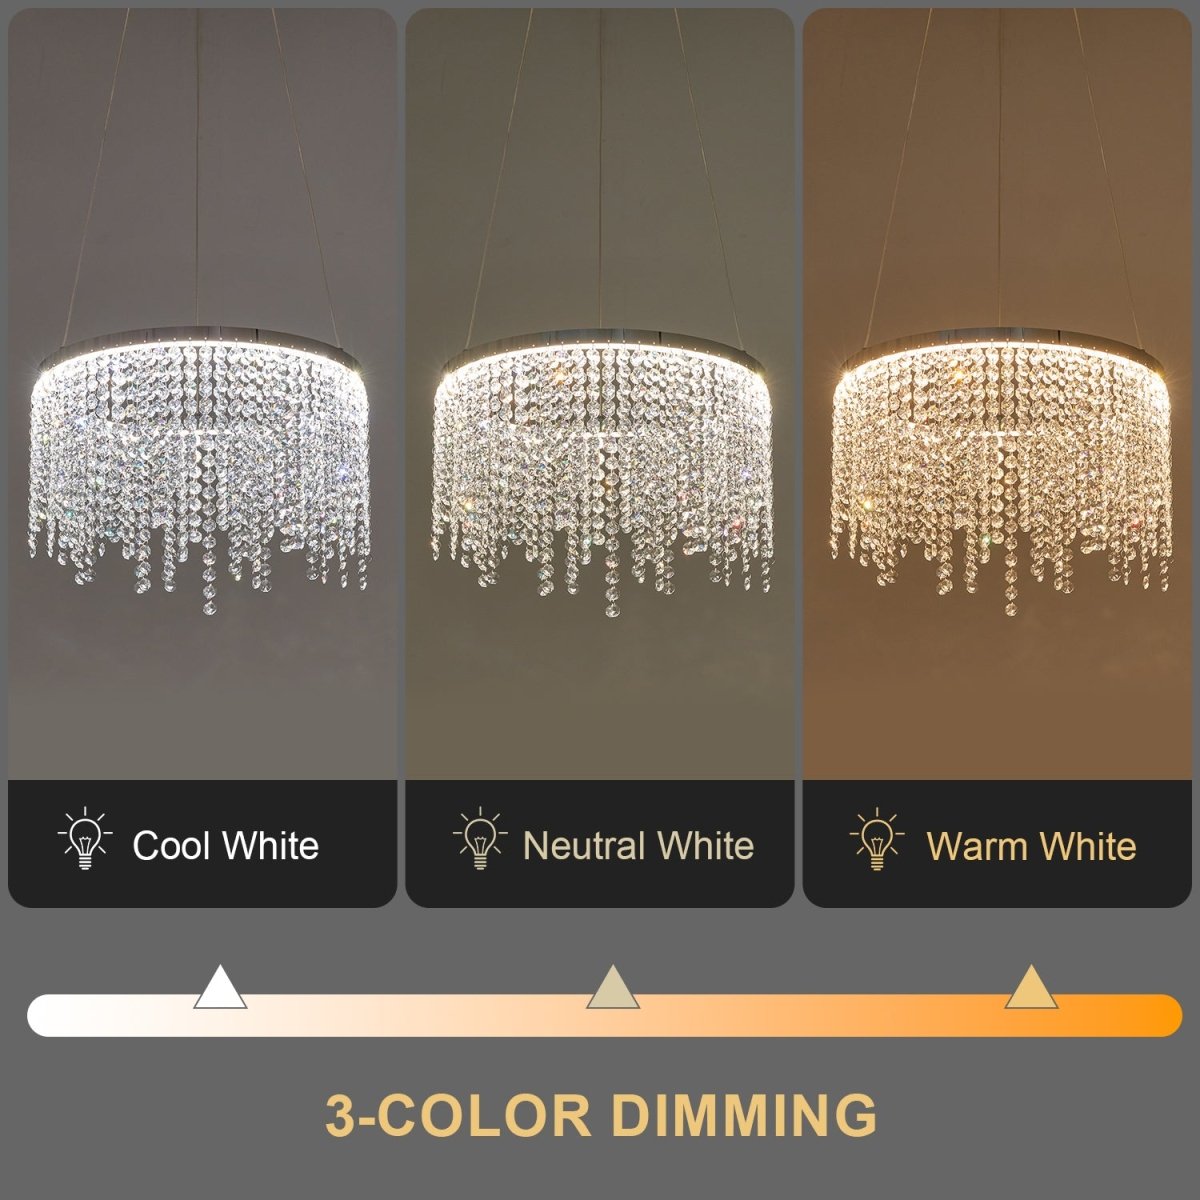 ExBrite Fancy hanging ceiling lamps,Modern Pendant Light,Crystal Chandelier,Height Adjustable,Dining Room Kitchen,Ceiling Hanging Over Table